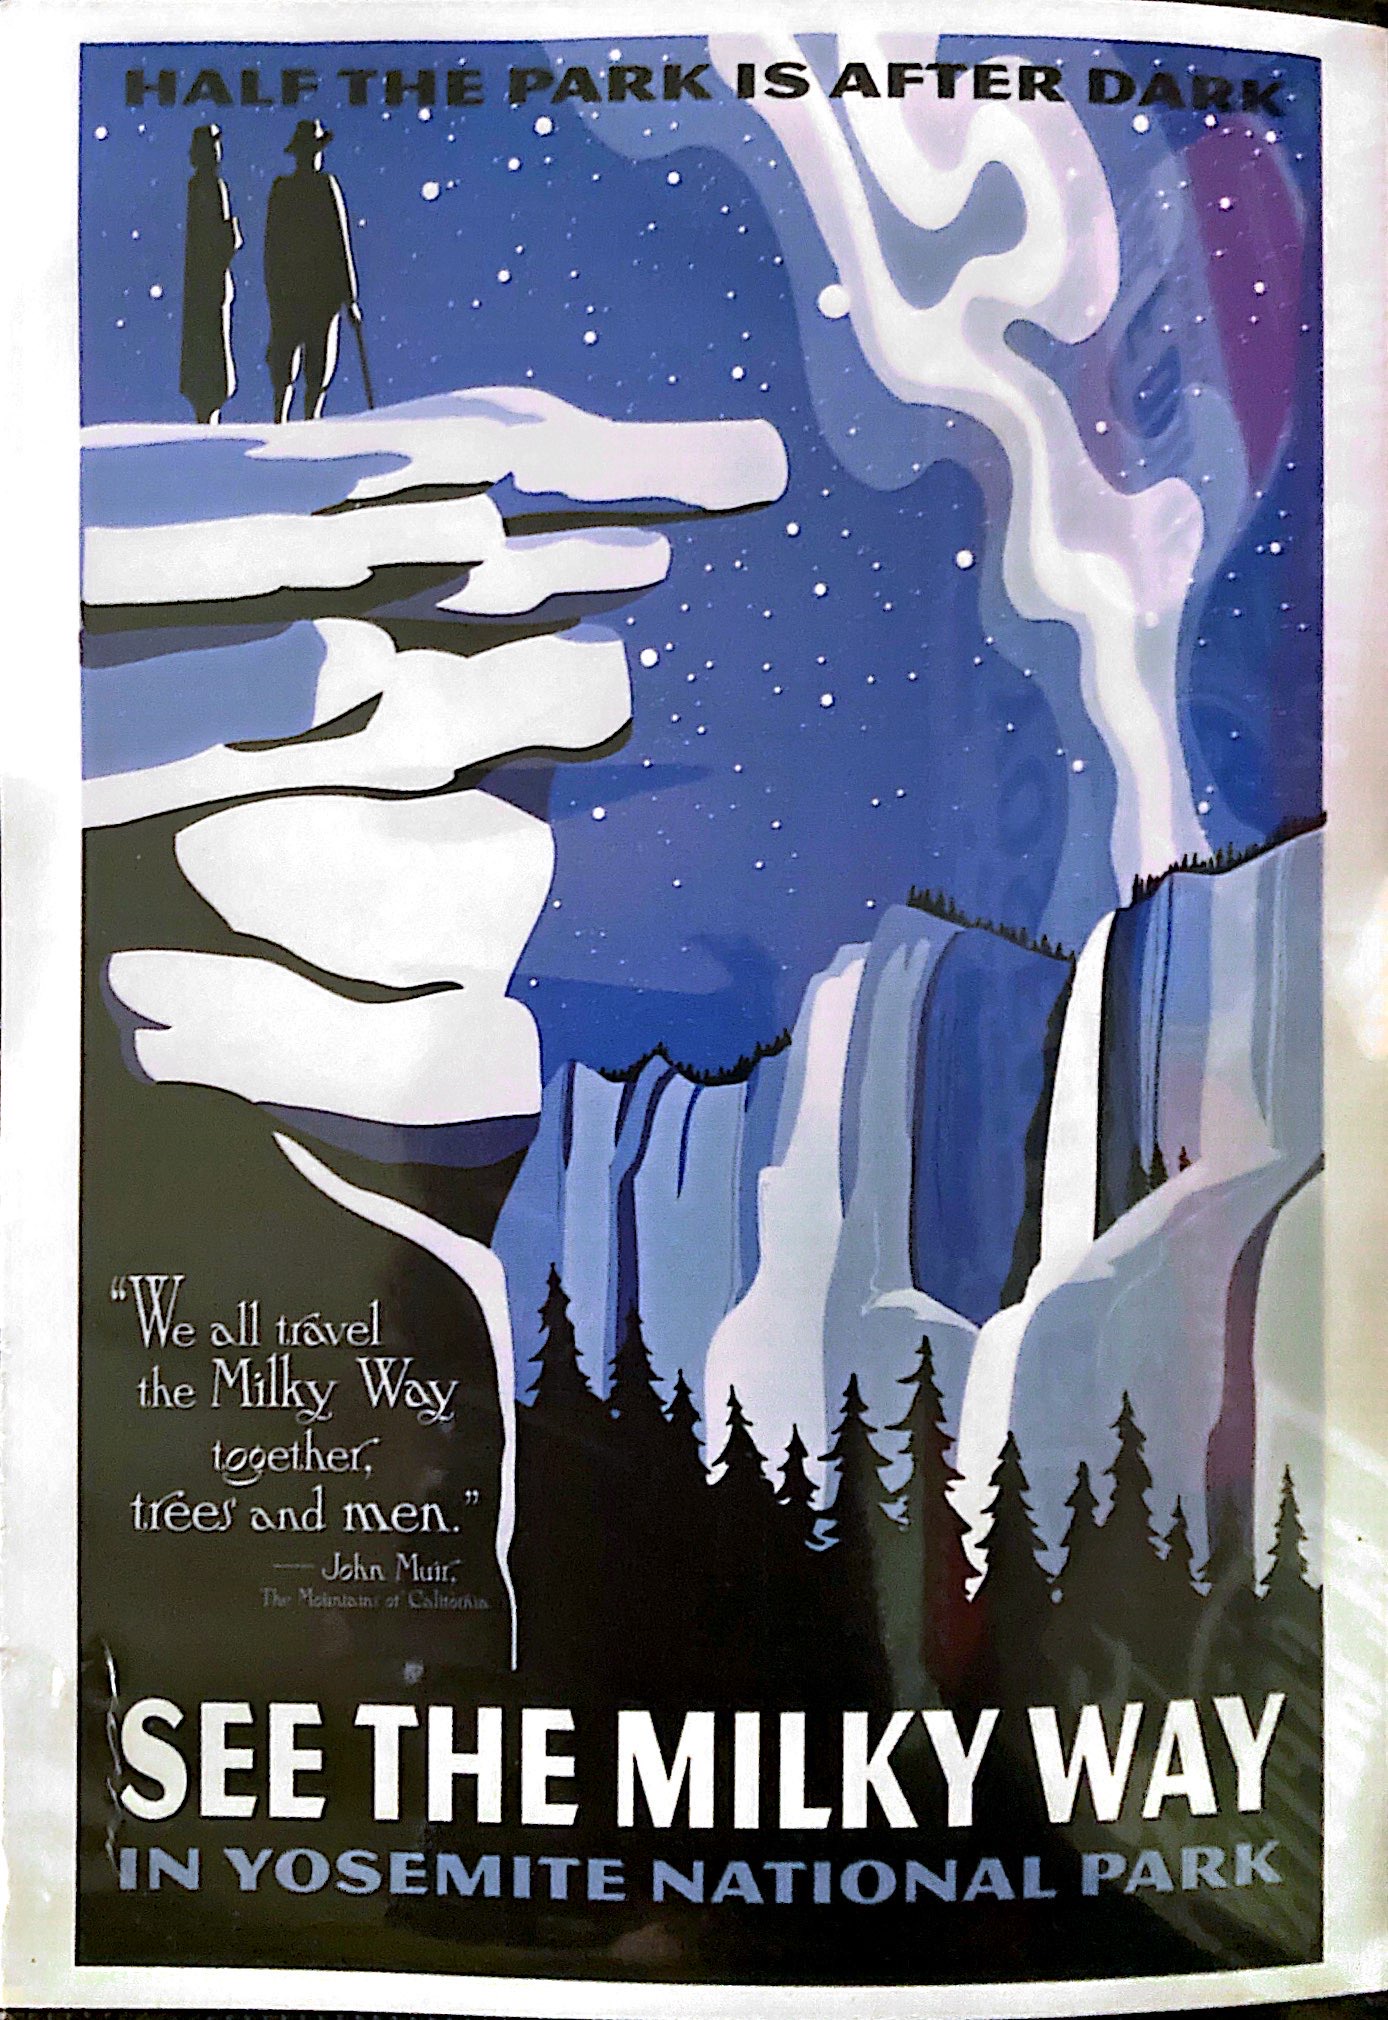 See the Milky Way in Yosemite, illustration